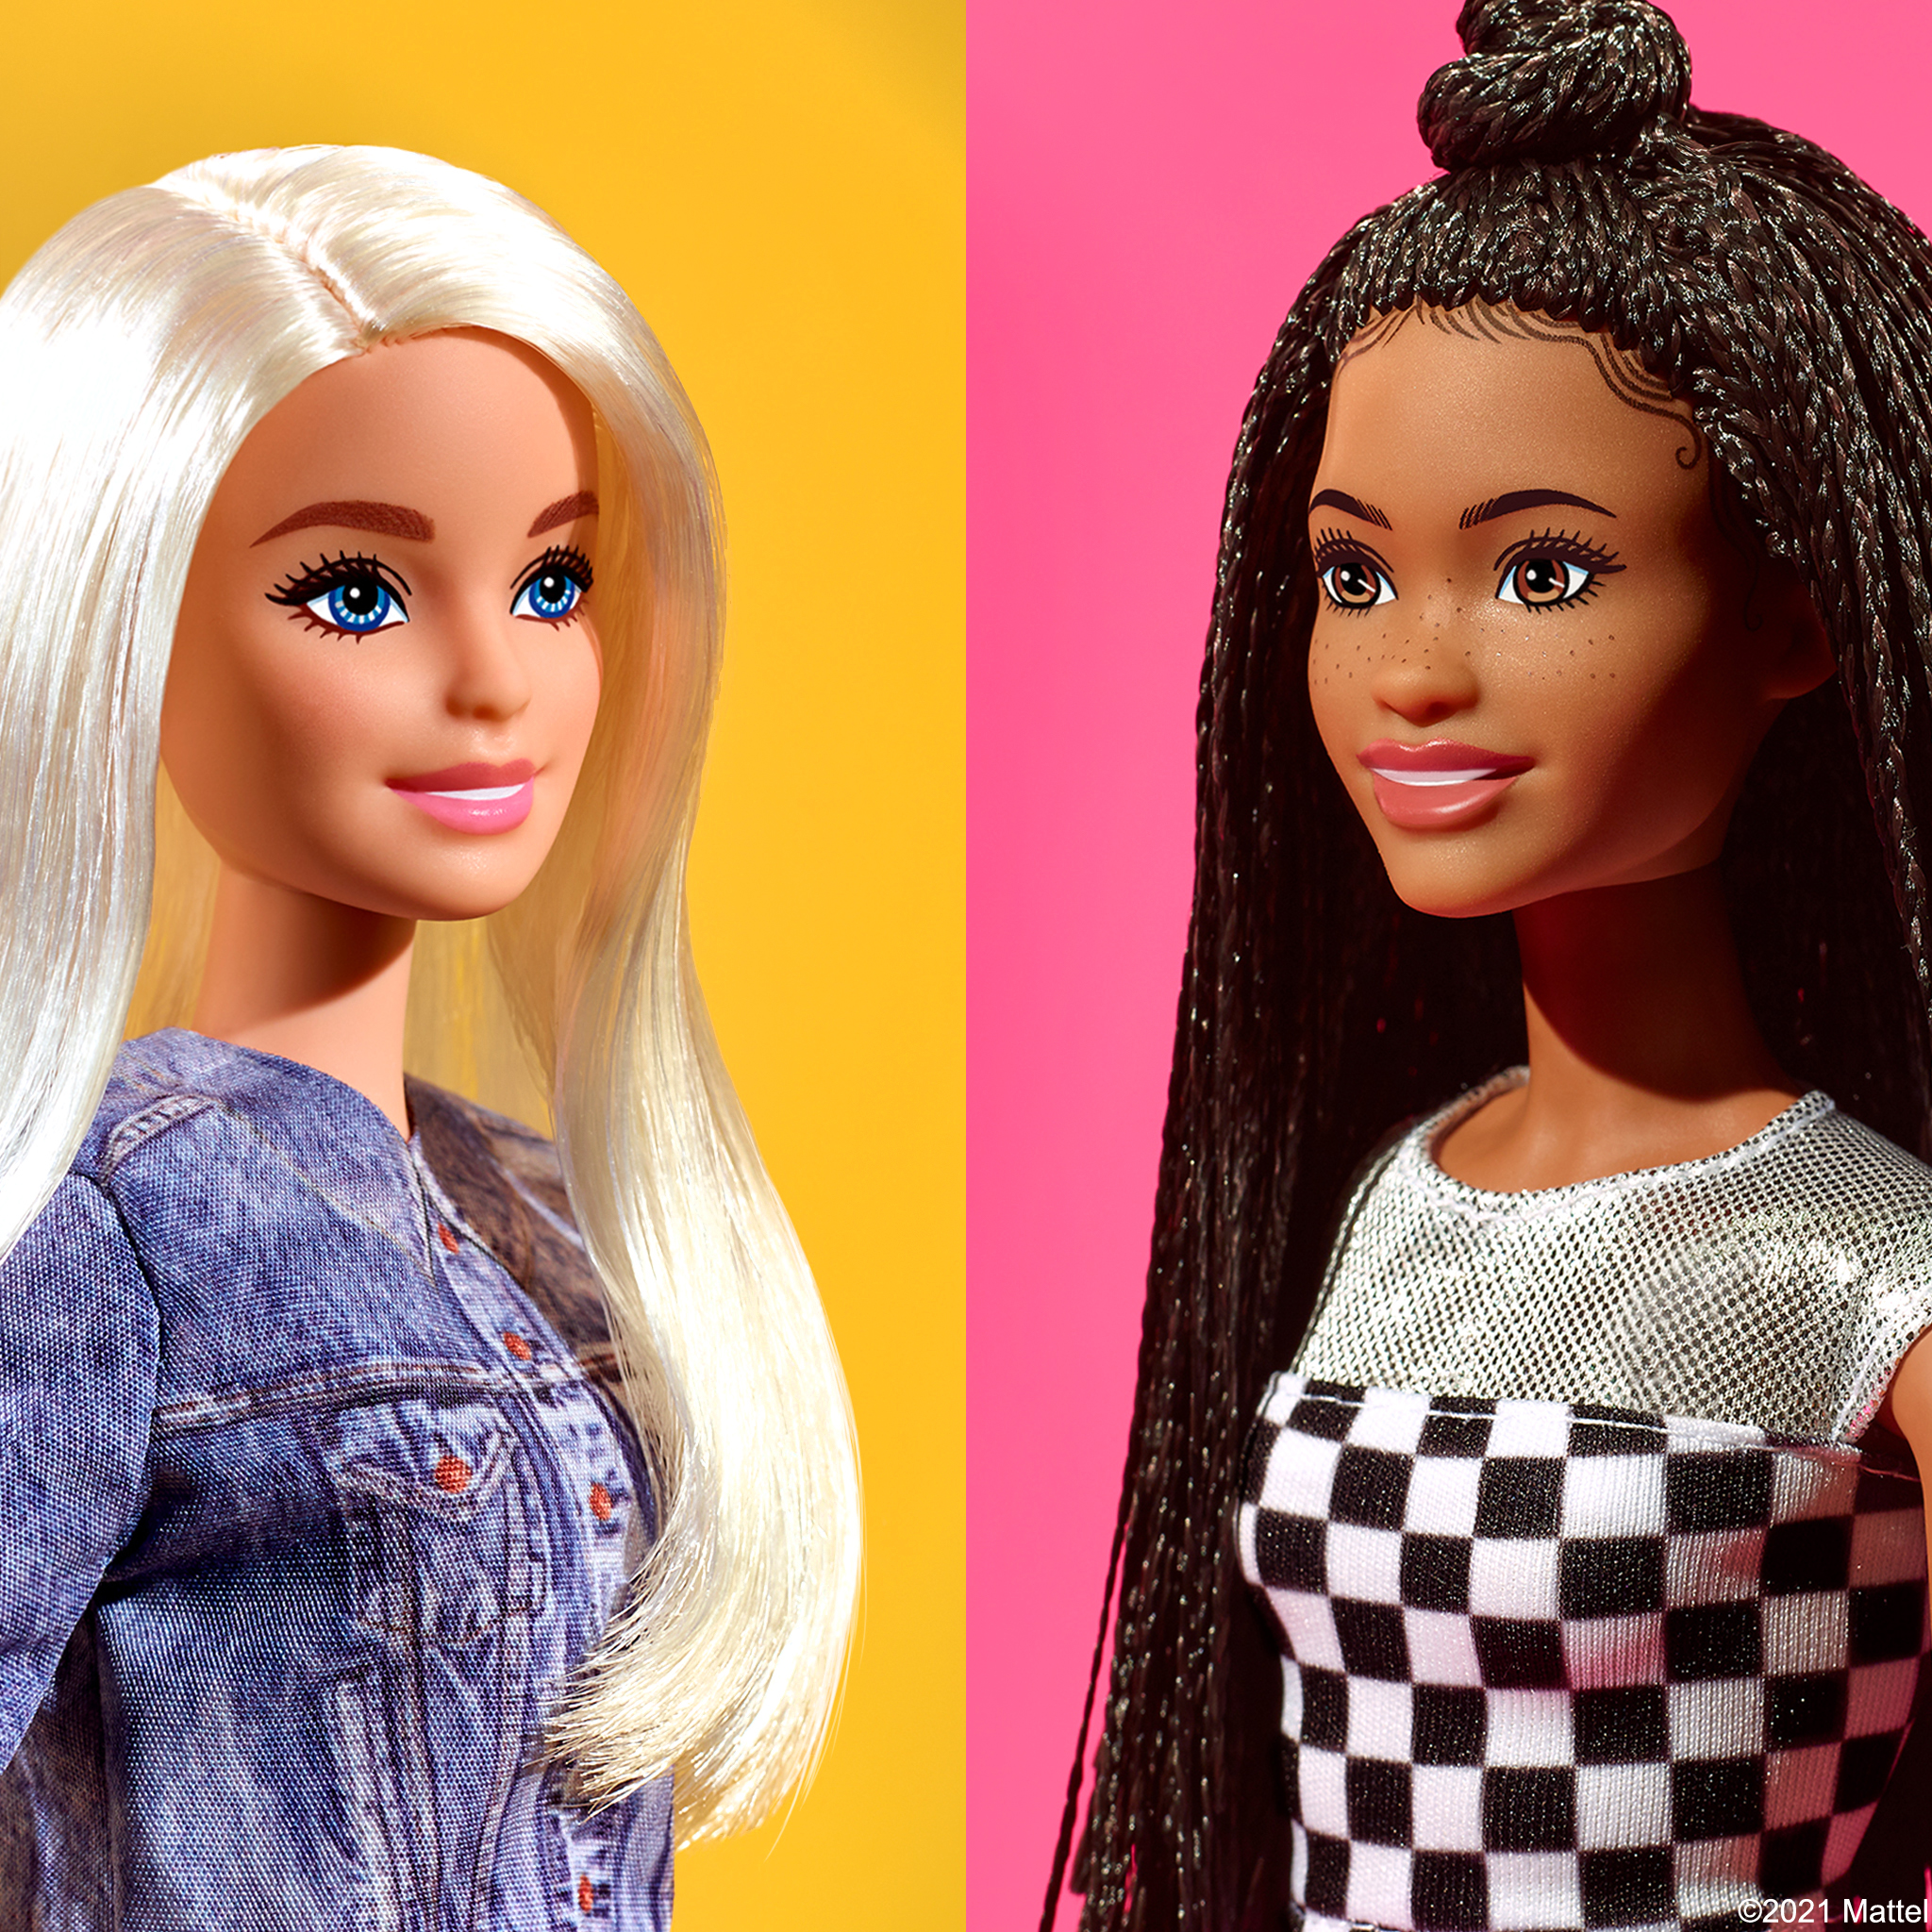 Barbie on Twitter: "Big dreams + Best friends = the perfect #Barbie weekend. Tag a you want catch up with soon! https://t.co/9eE10G07tT" / Twitter